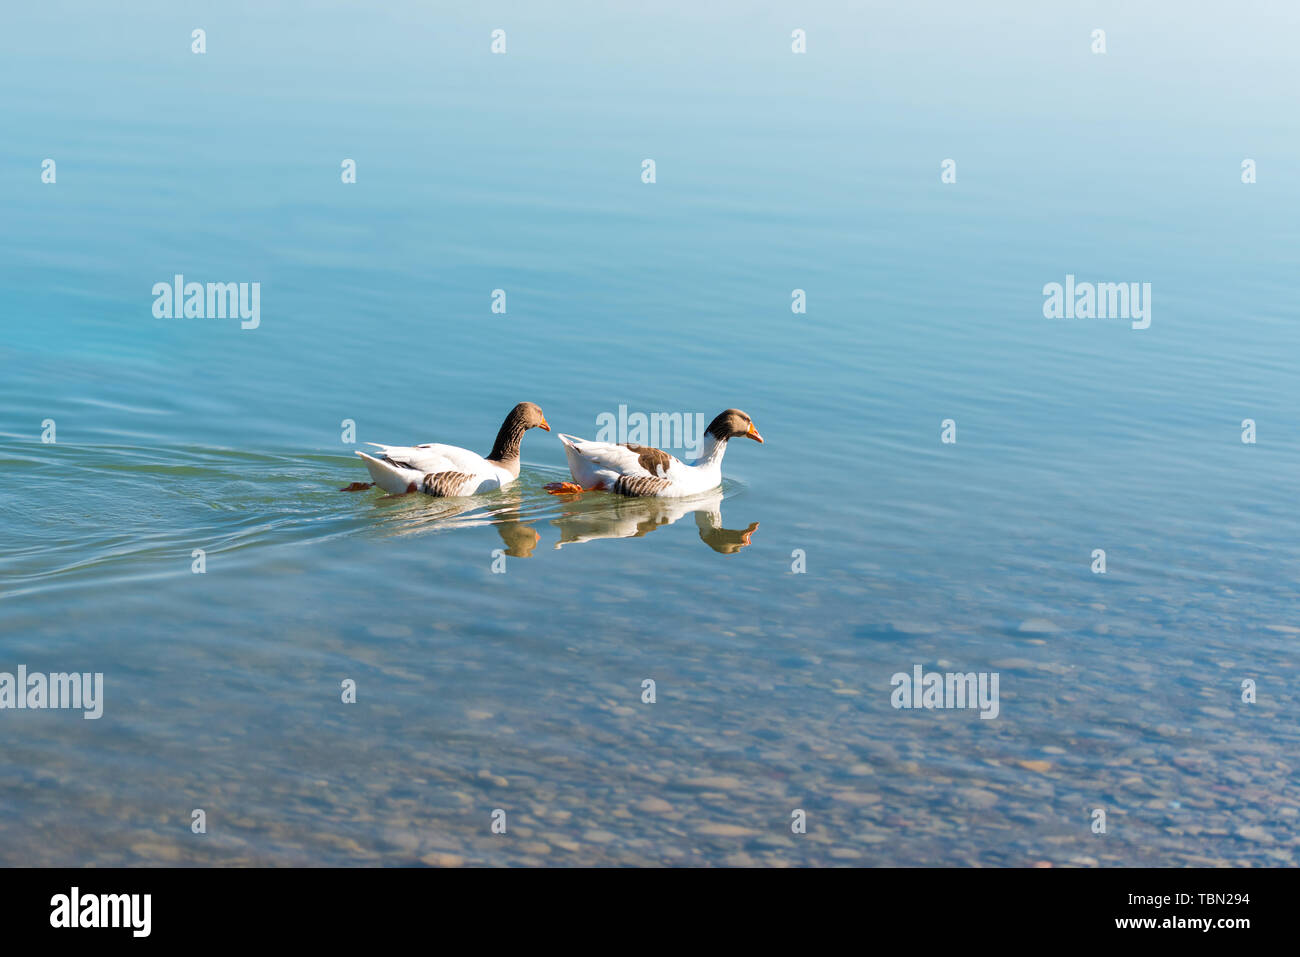 Goose swimming in the blue water with waves. Duck swimming in the blue water. Stock Photo